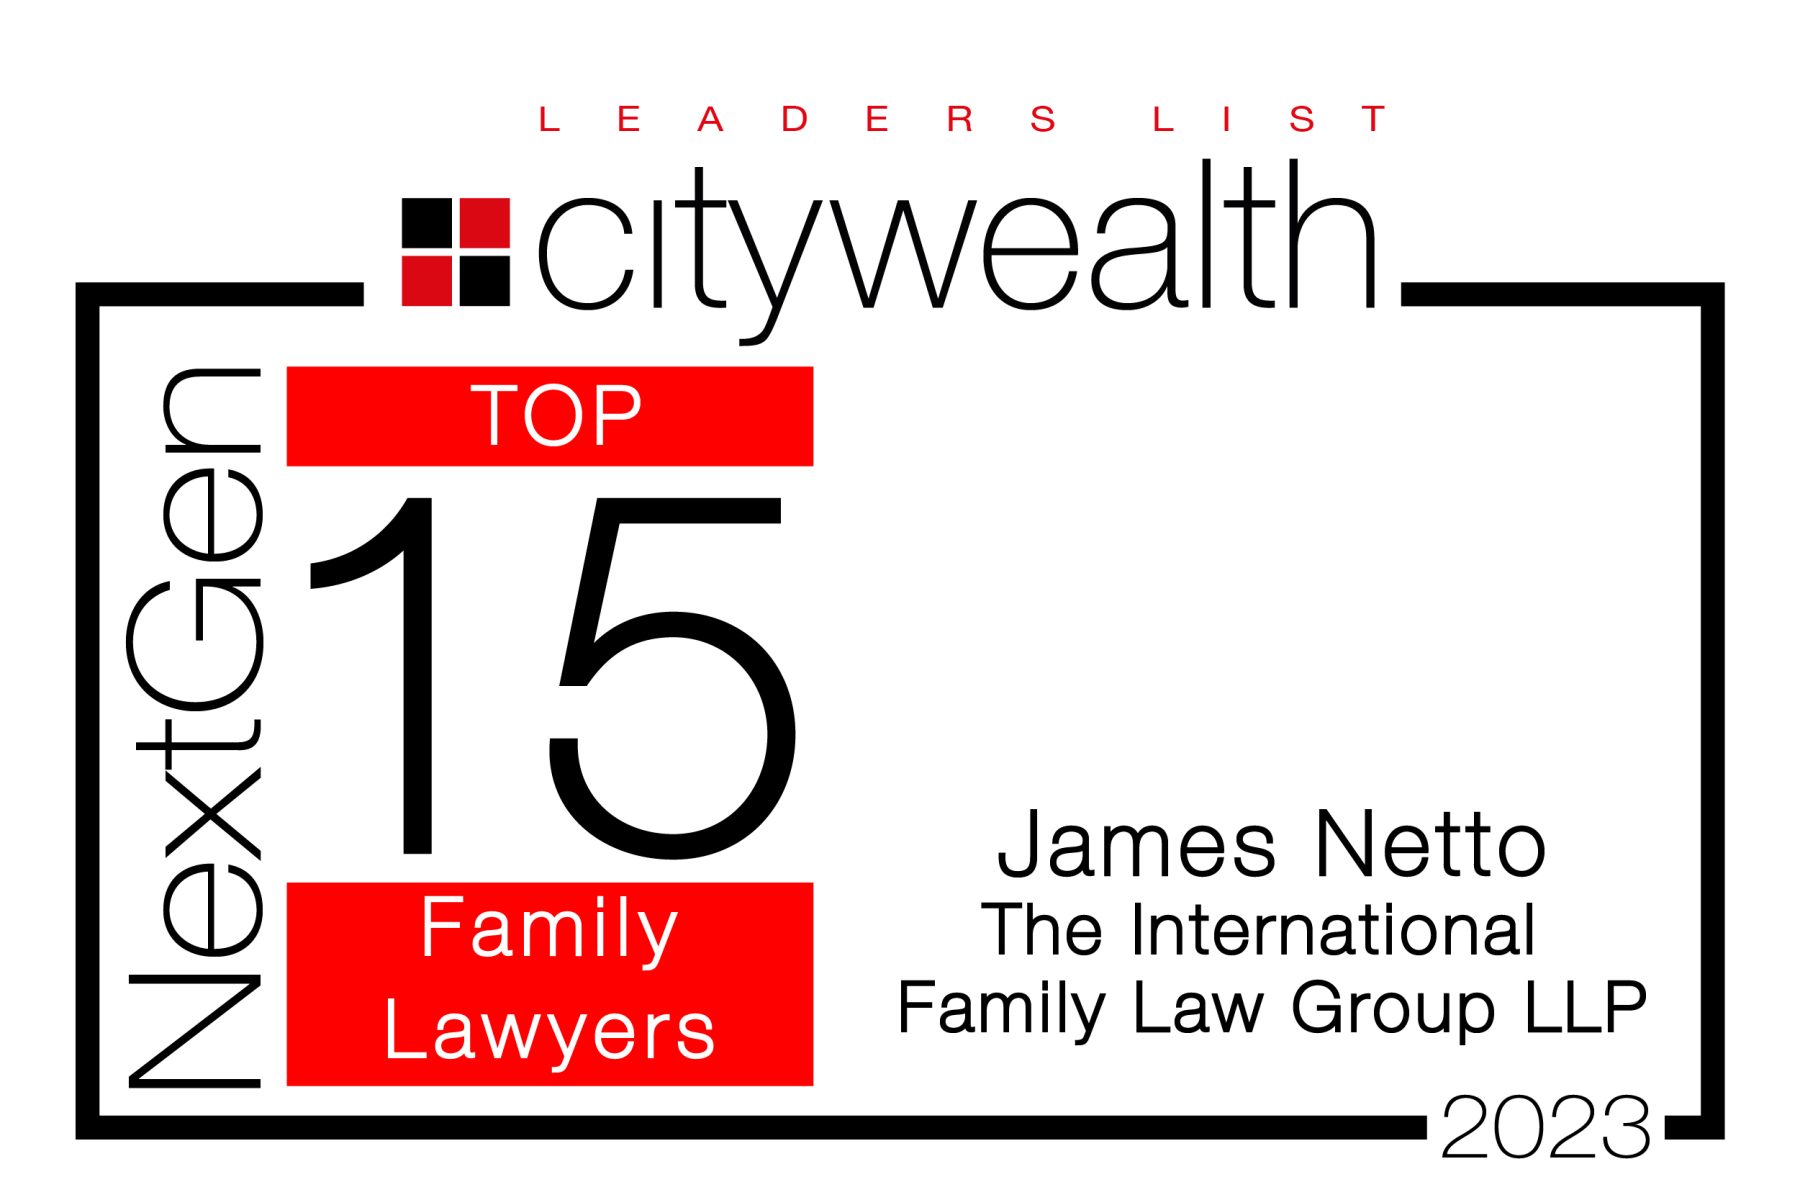 Citywealth NextGen Top 15 Family Lawyers - James Netto - The International Family Law Group LLP